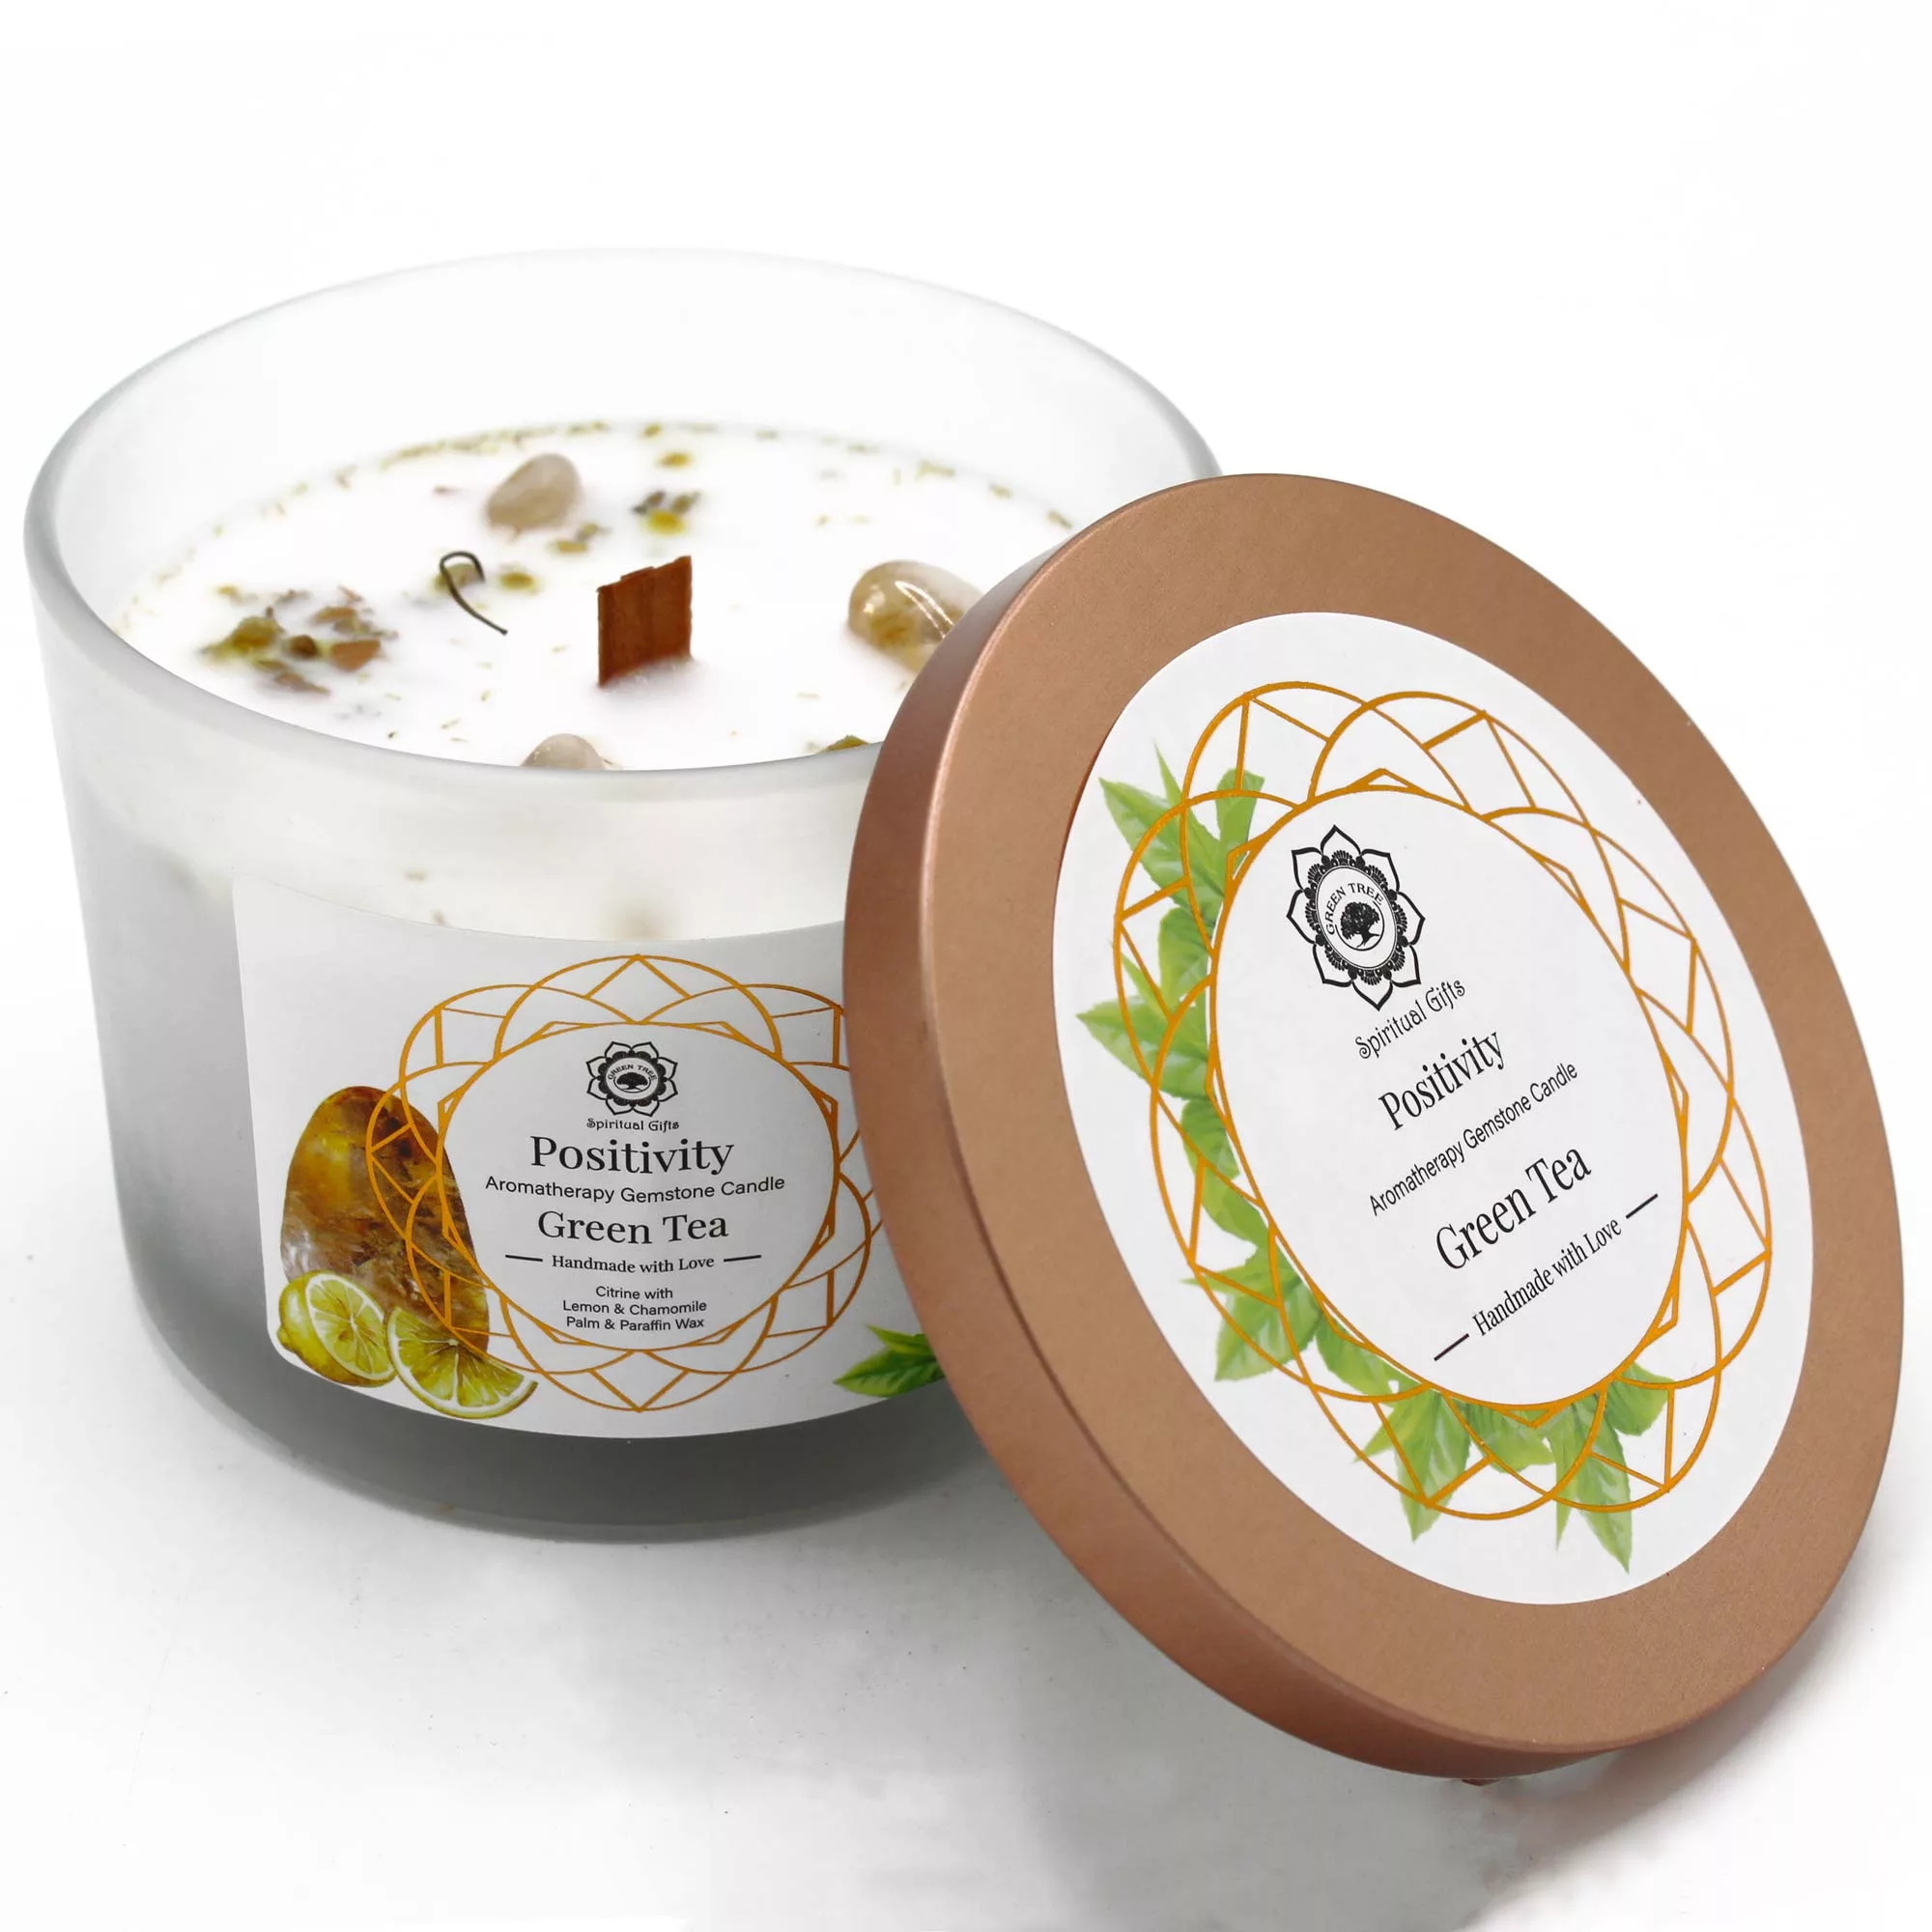 Green Tea and Citrine Gemstone Candle – Positivity